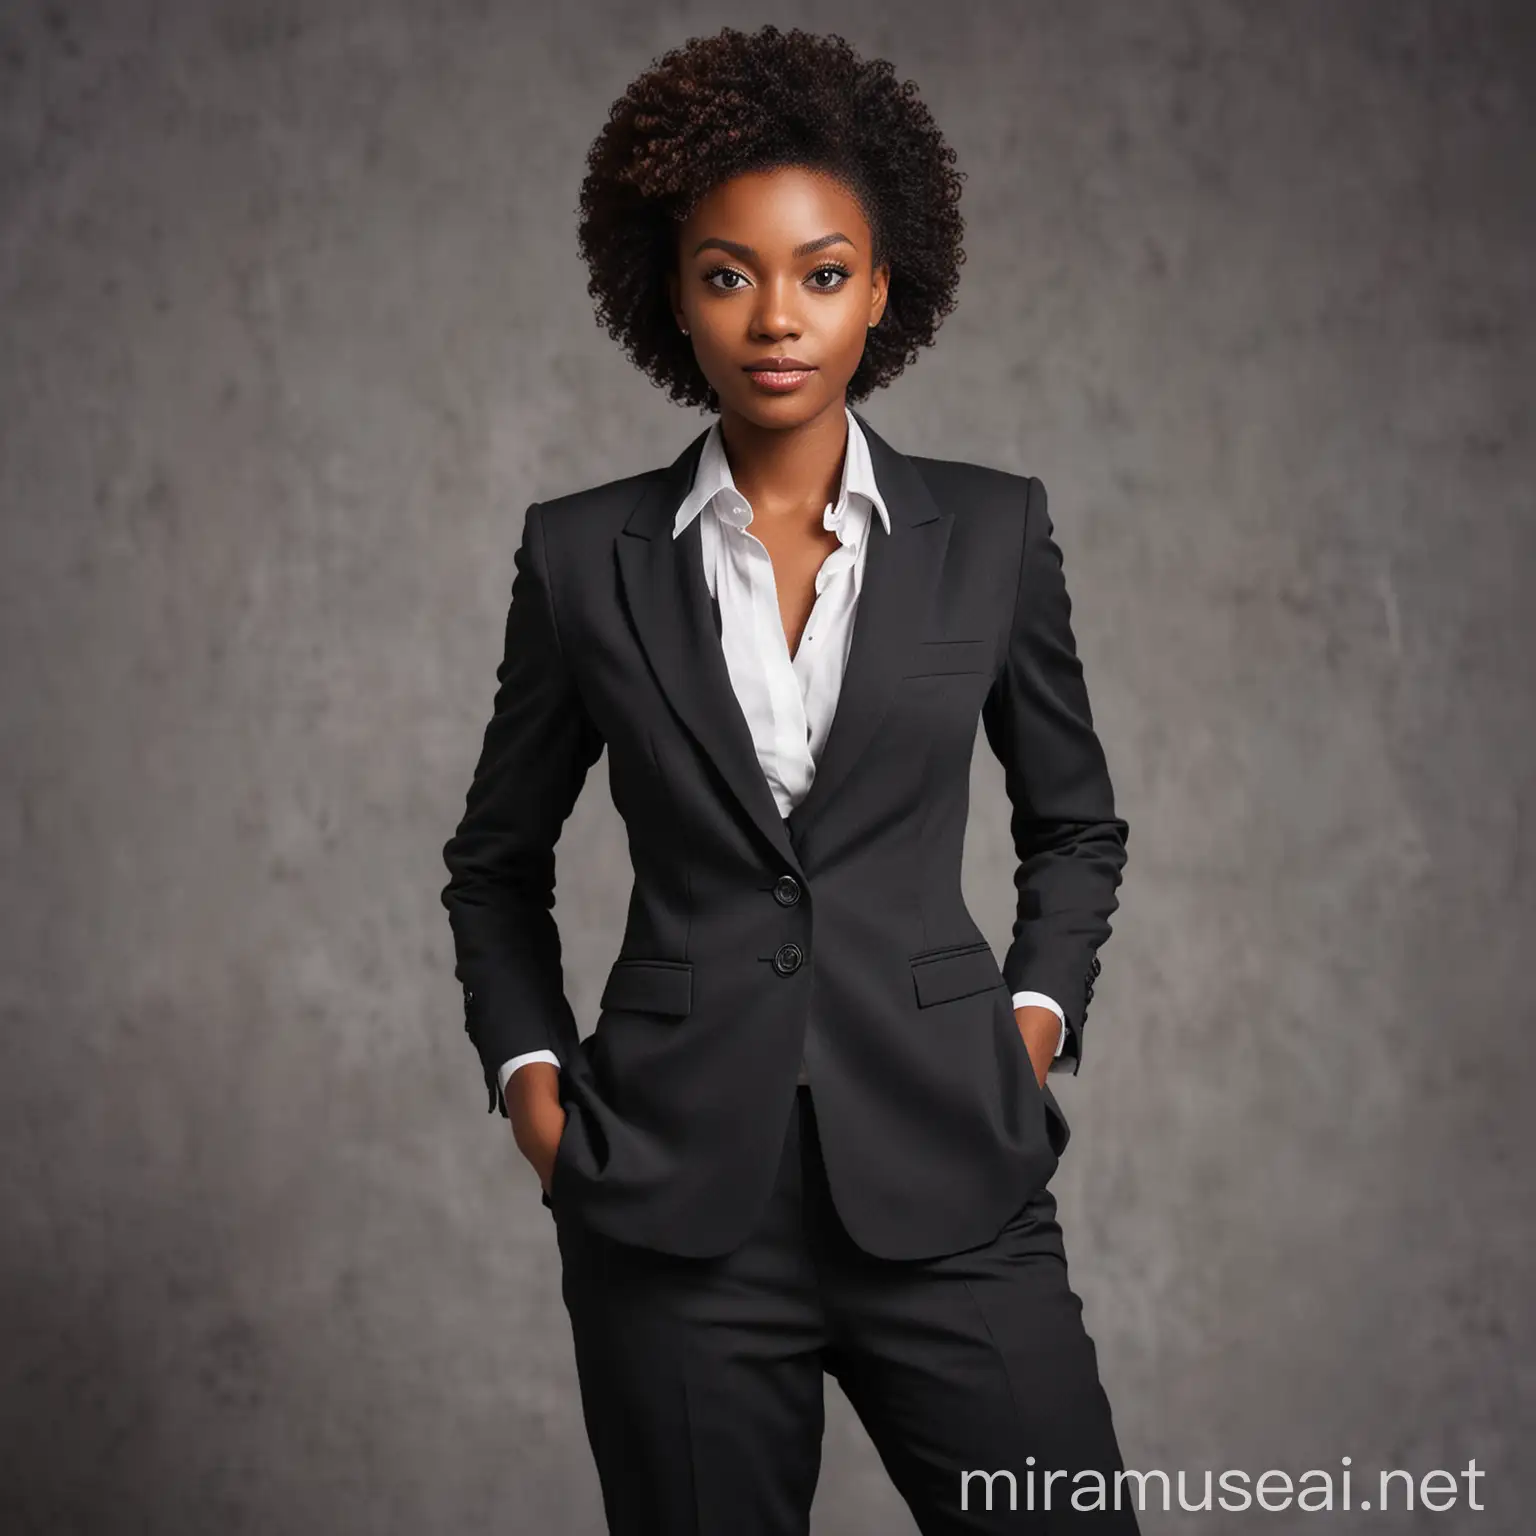 generate a professional image of a black lady in suit